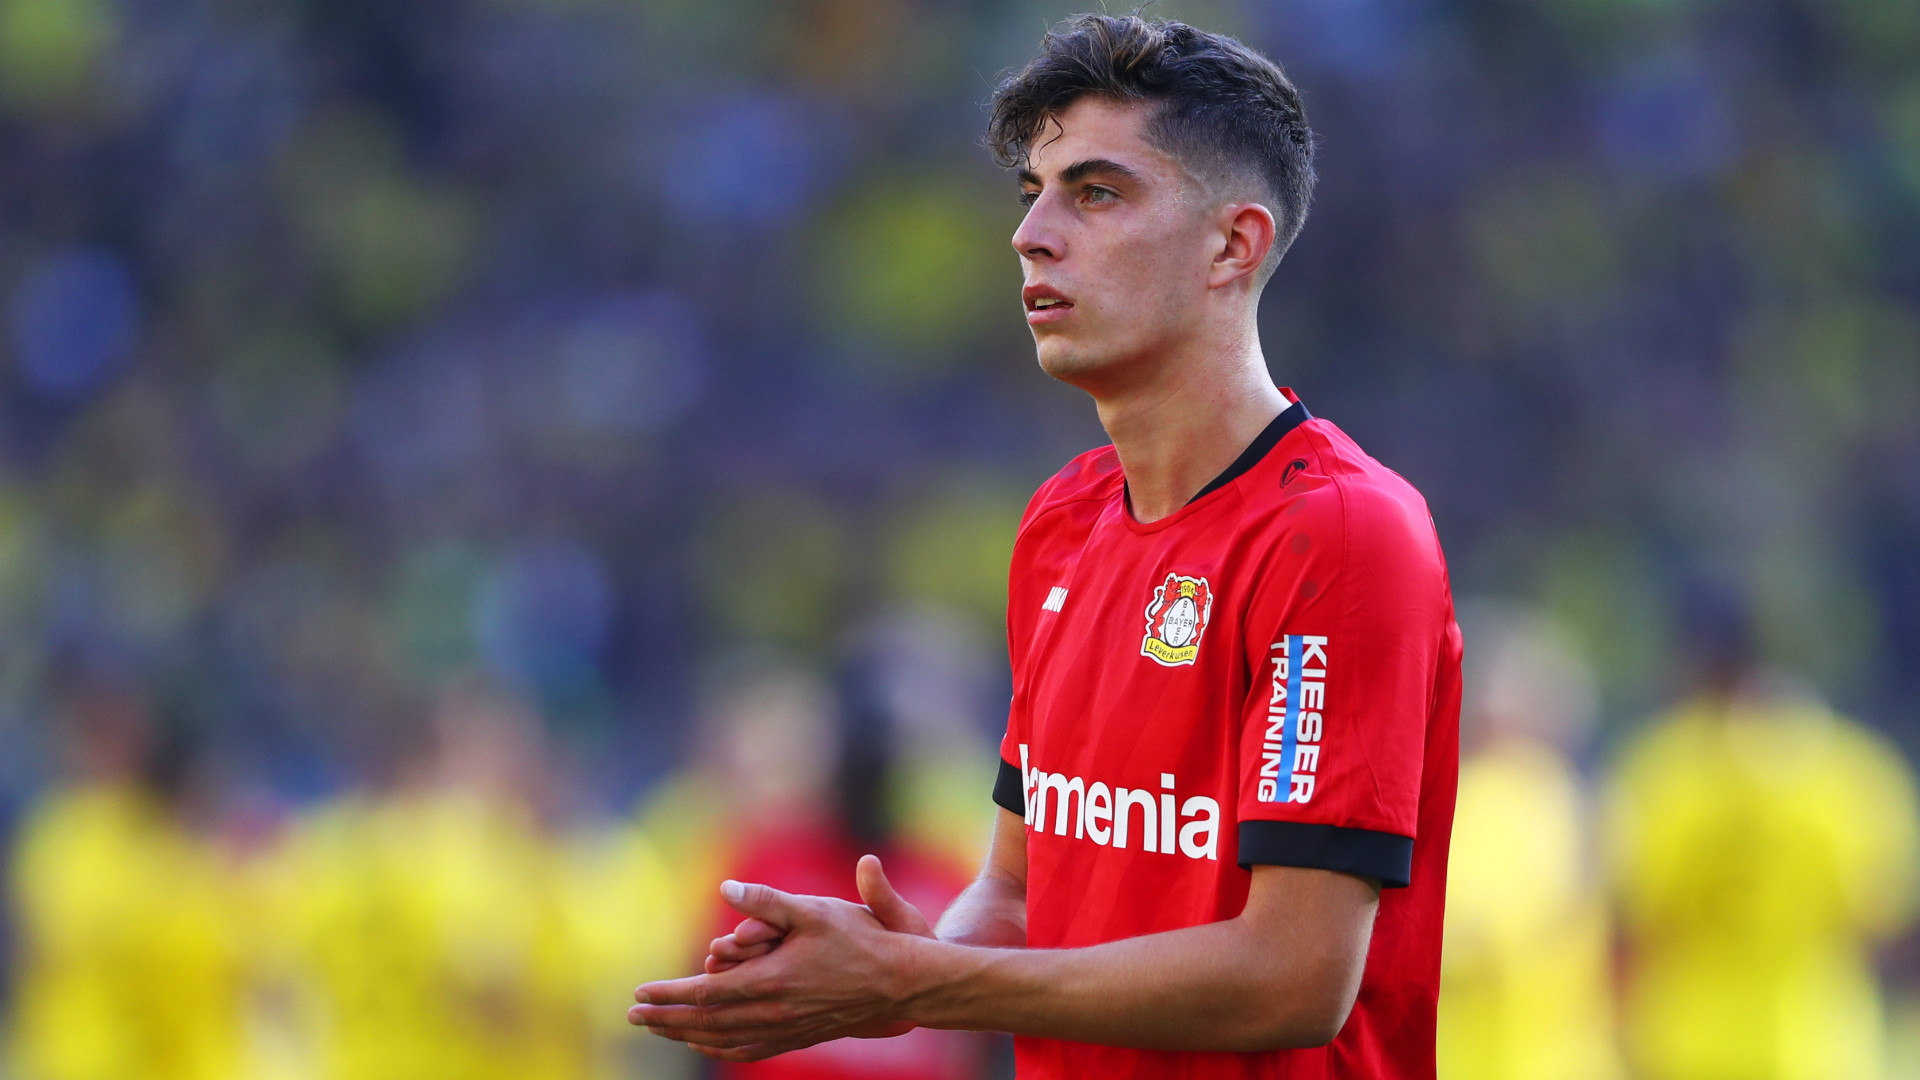 'Havertz is a special player' - Bosz insists Liverpool-linked midfielder can get even better